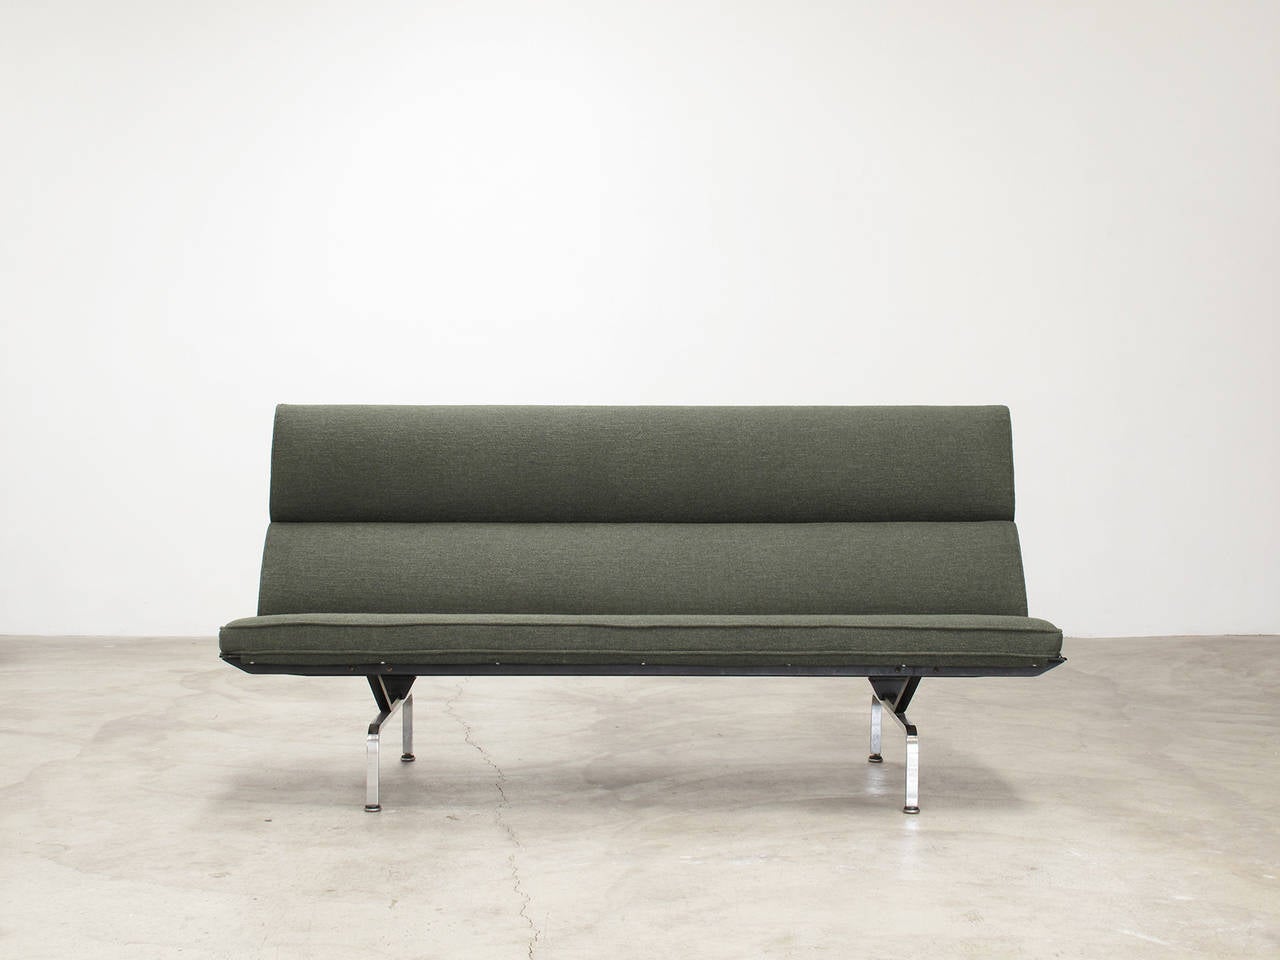 Sofa Compact designed by Charles and Ray Eames for Herman Miller, mid to late 1960s production.

Signed with applied metal manufacturer's label to underside: Charles Eames Design Herman Miller Zeeland Michigan. All four legs retain the original